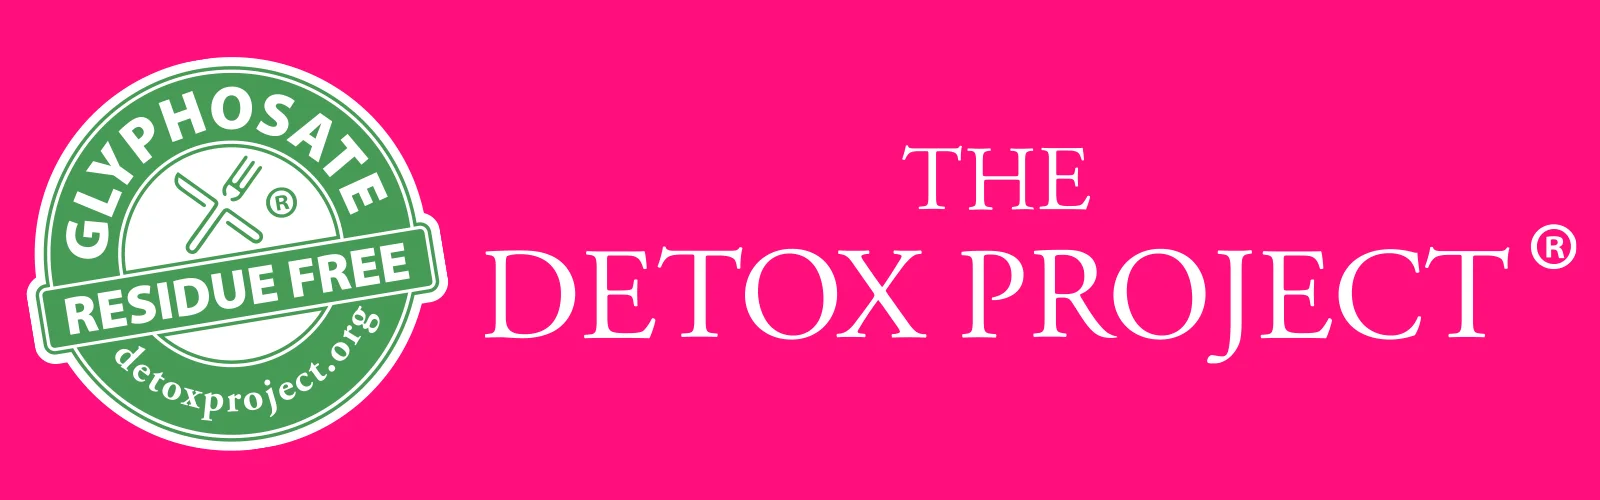 The Detox Project glyphosate residue-free certification with pink background